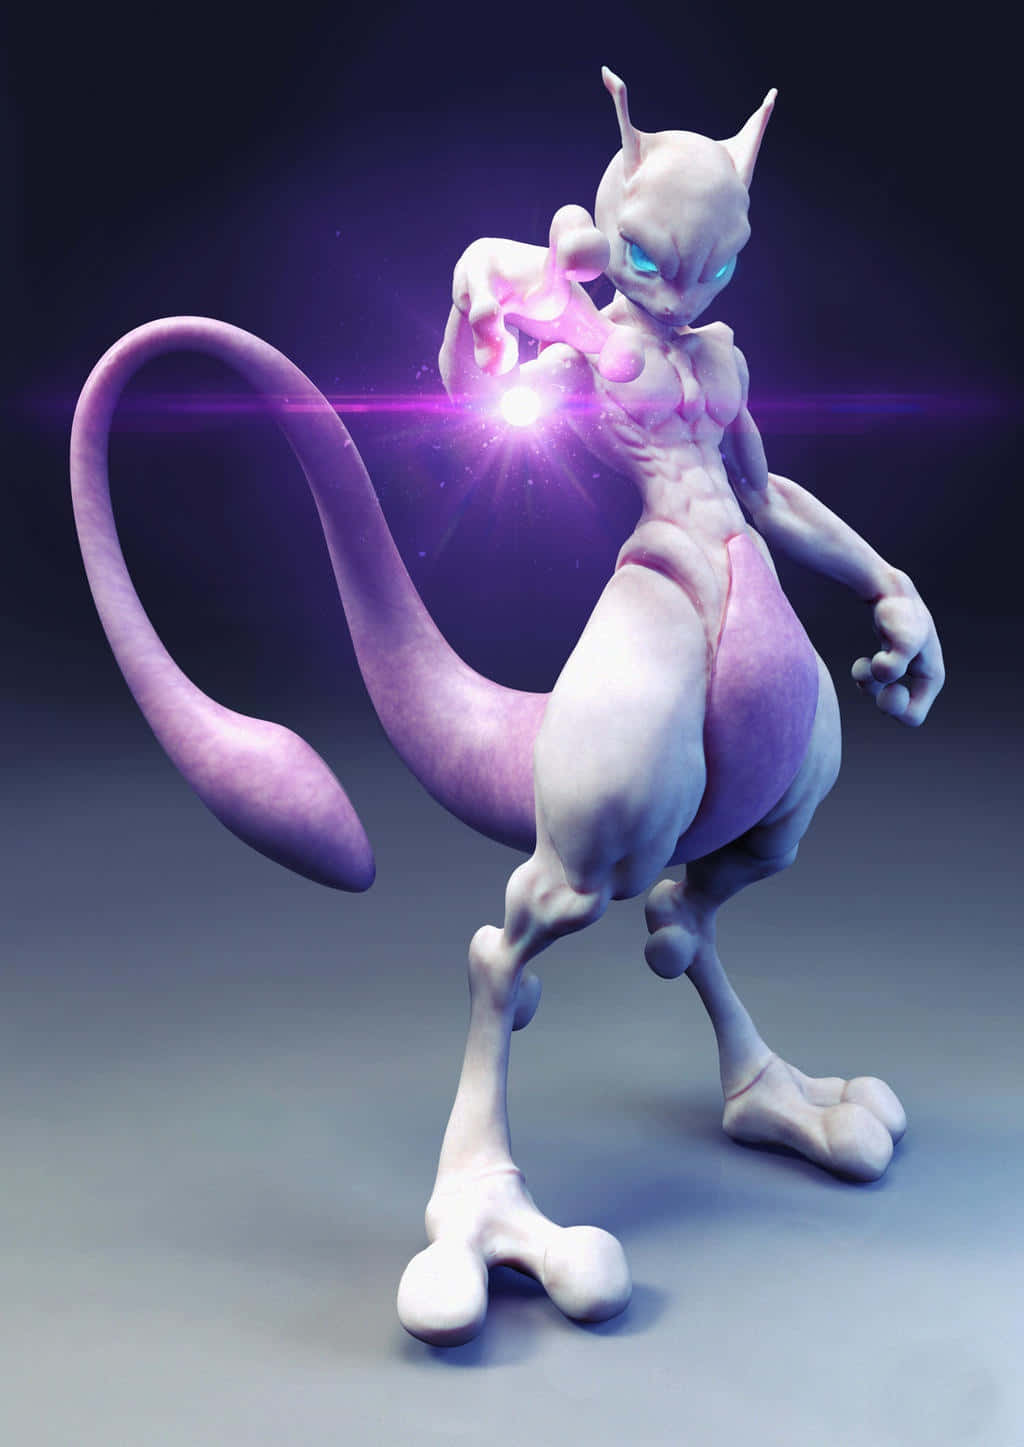 Immerse yourself in the power of PlayStation's Legendary Pokémon, Mewtwo